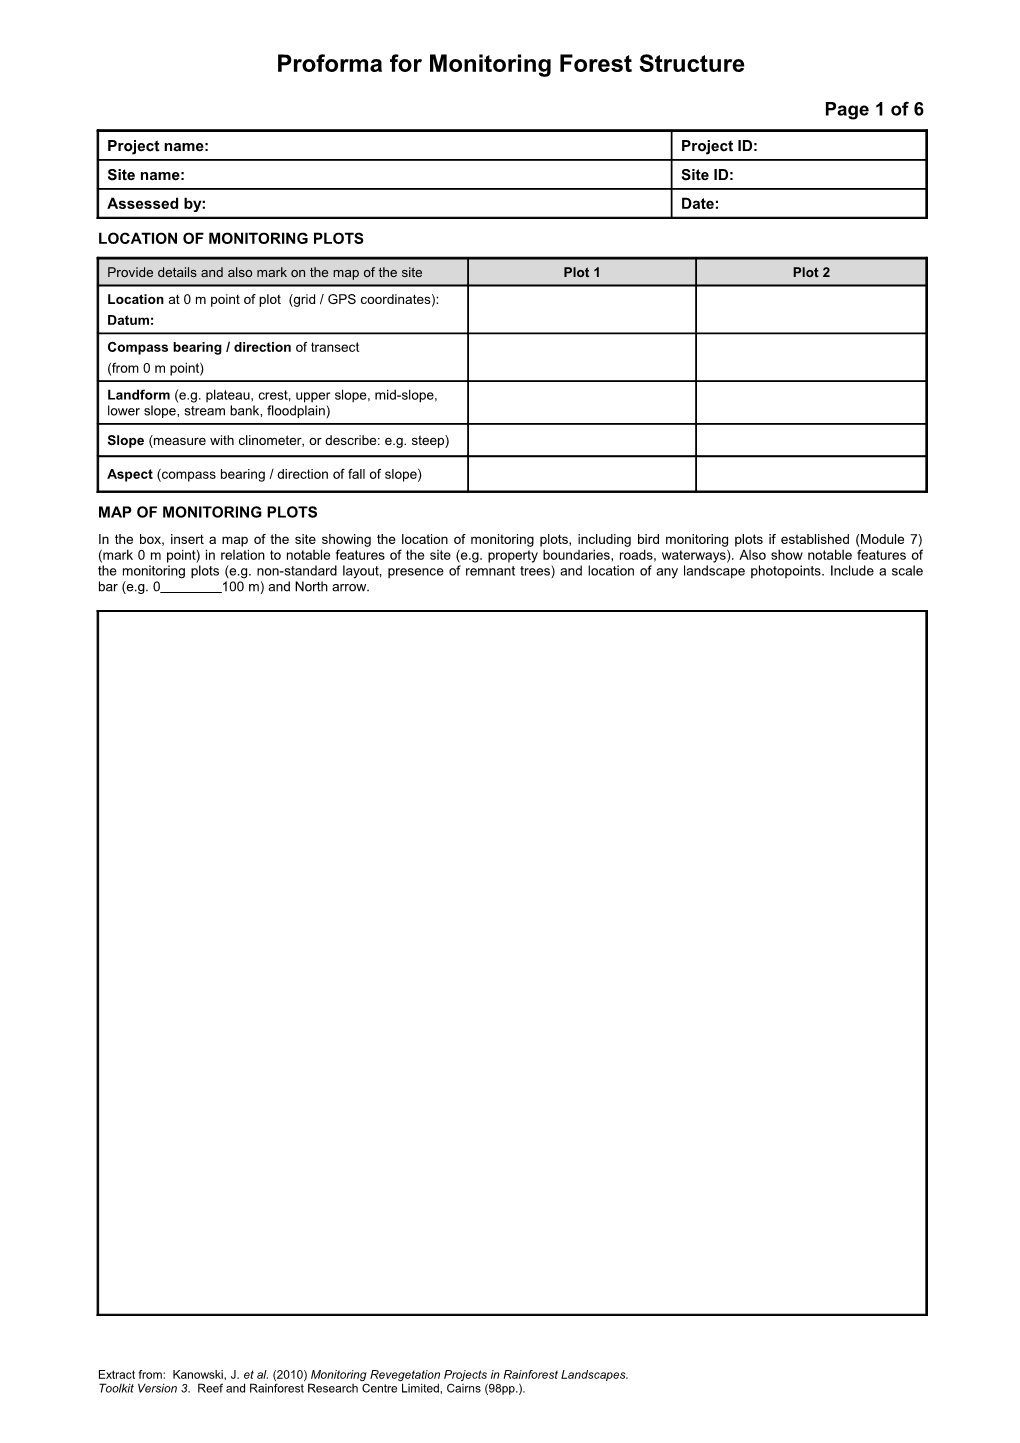 Proforma for Monitoring Forest Structure